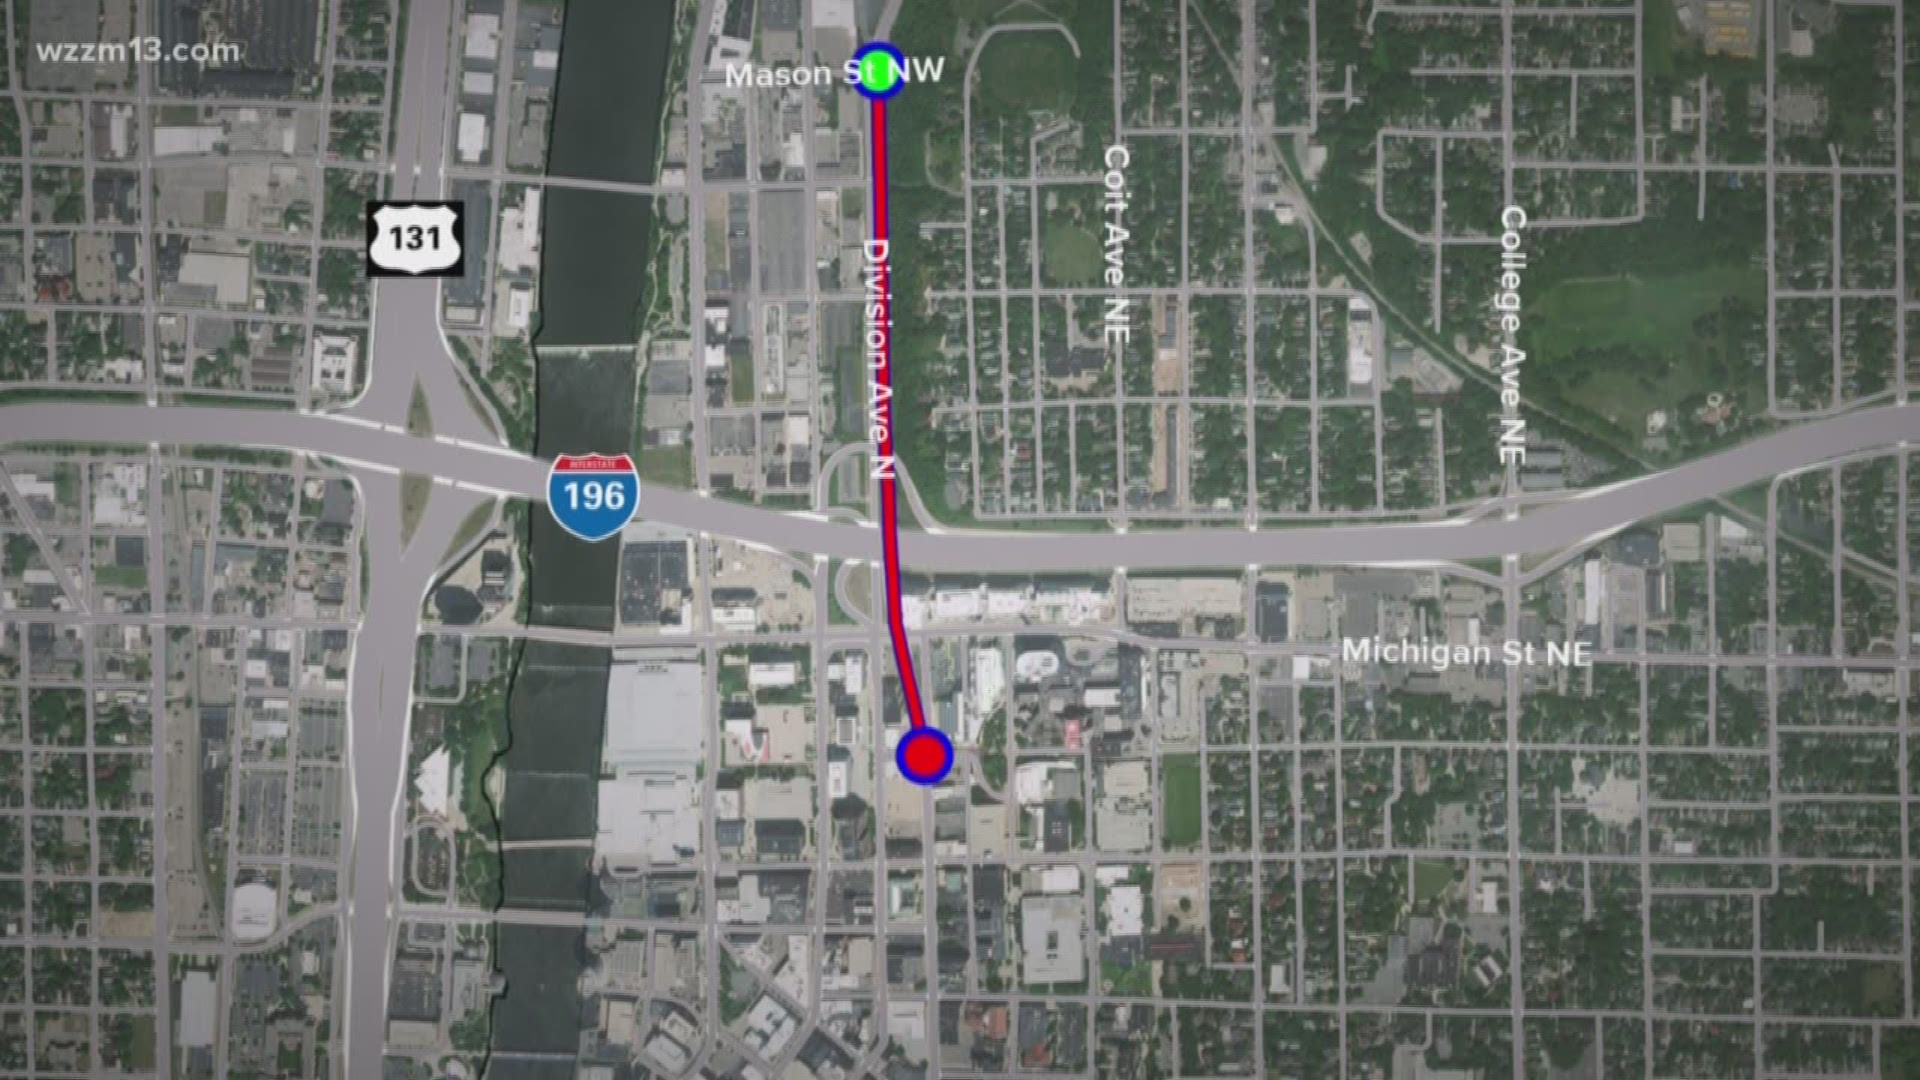 The next phase of ongoing work to construct a new westbound I-196 on-ramp will close Division Avenue North for a month. Beginning Monday, June 3, Division Avenue North will be closed between Mason and Crescent streets. The closure is expected to go through July 4.